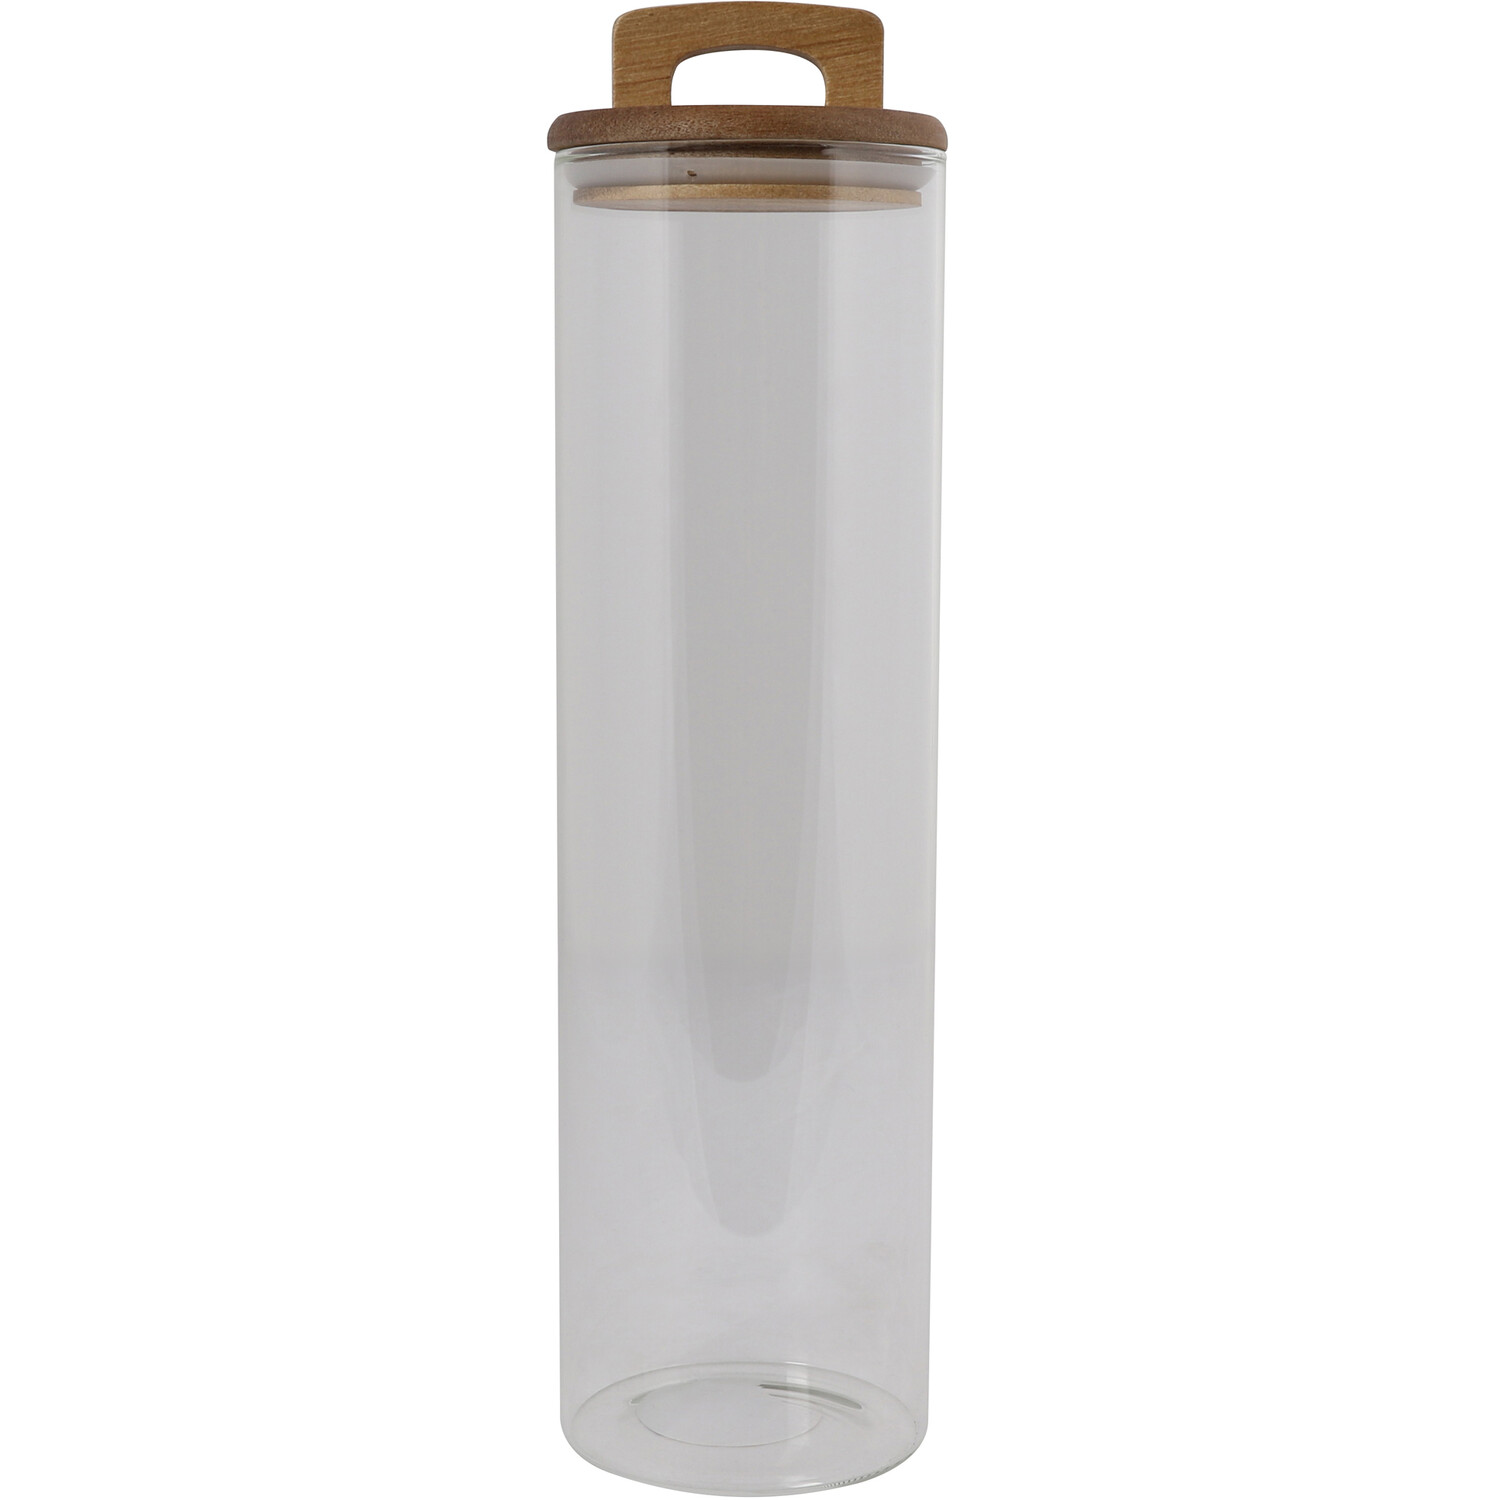 Storage Jar with Handled Lid - Clear / 1.8l Image 1